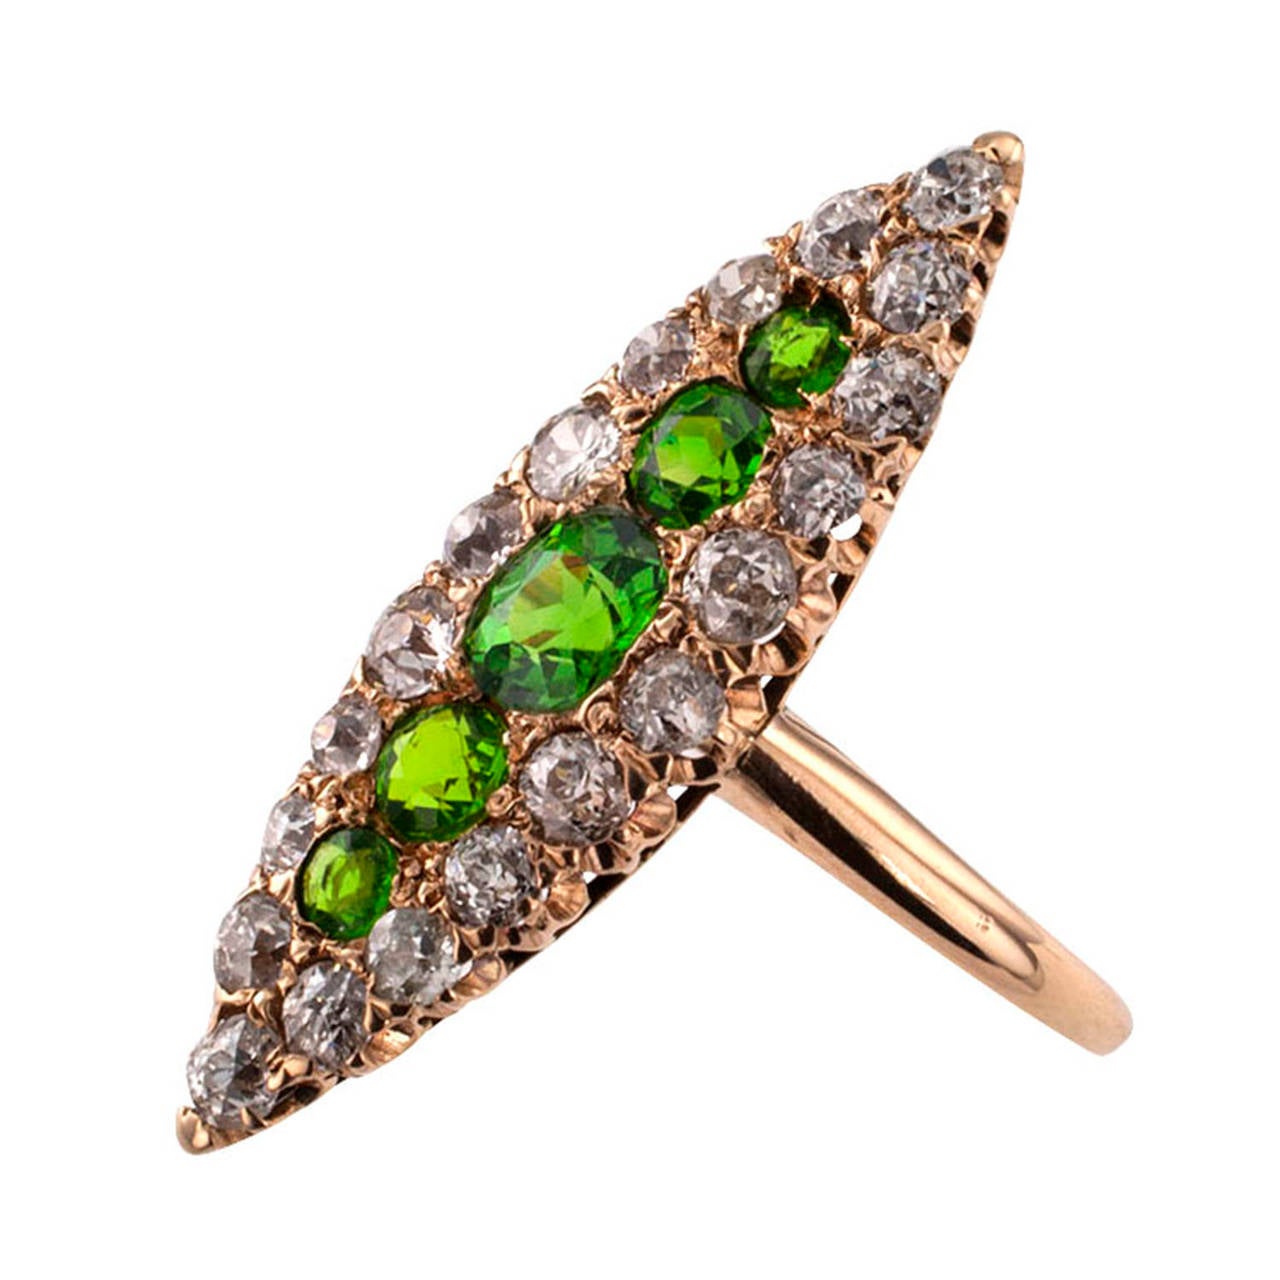 Demantoid garnets were the favorite gemstones of the Russian tzars and their super star jeweler Carl Faberge.  They also are considered one of the most precious of all gemstones, highly valued for their rarity, incomparable beauty and luminosity. 